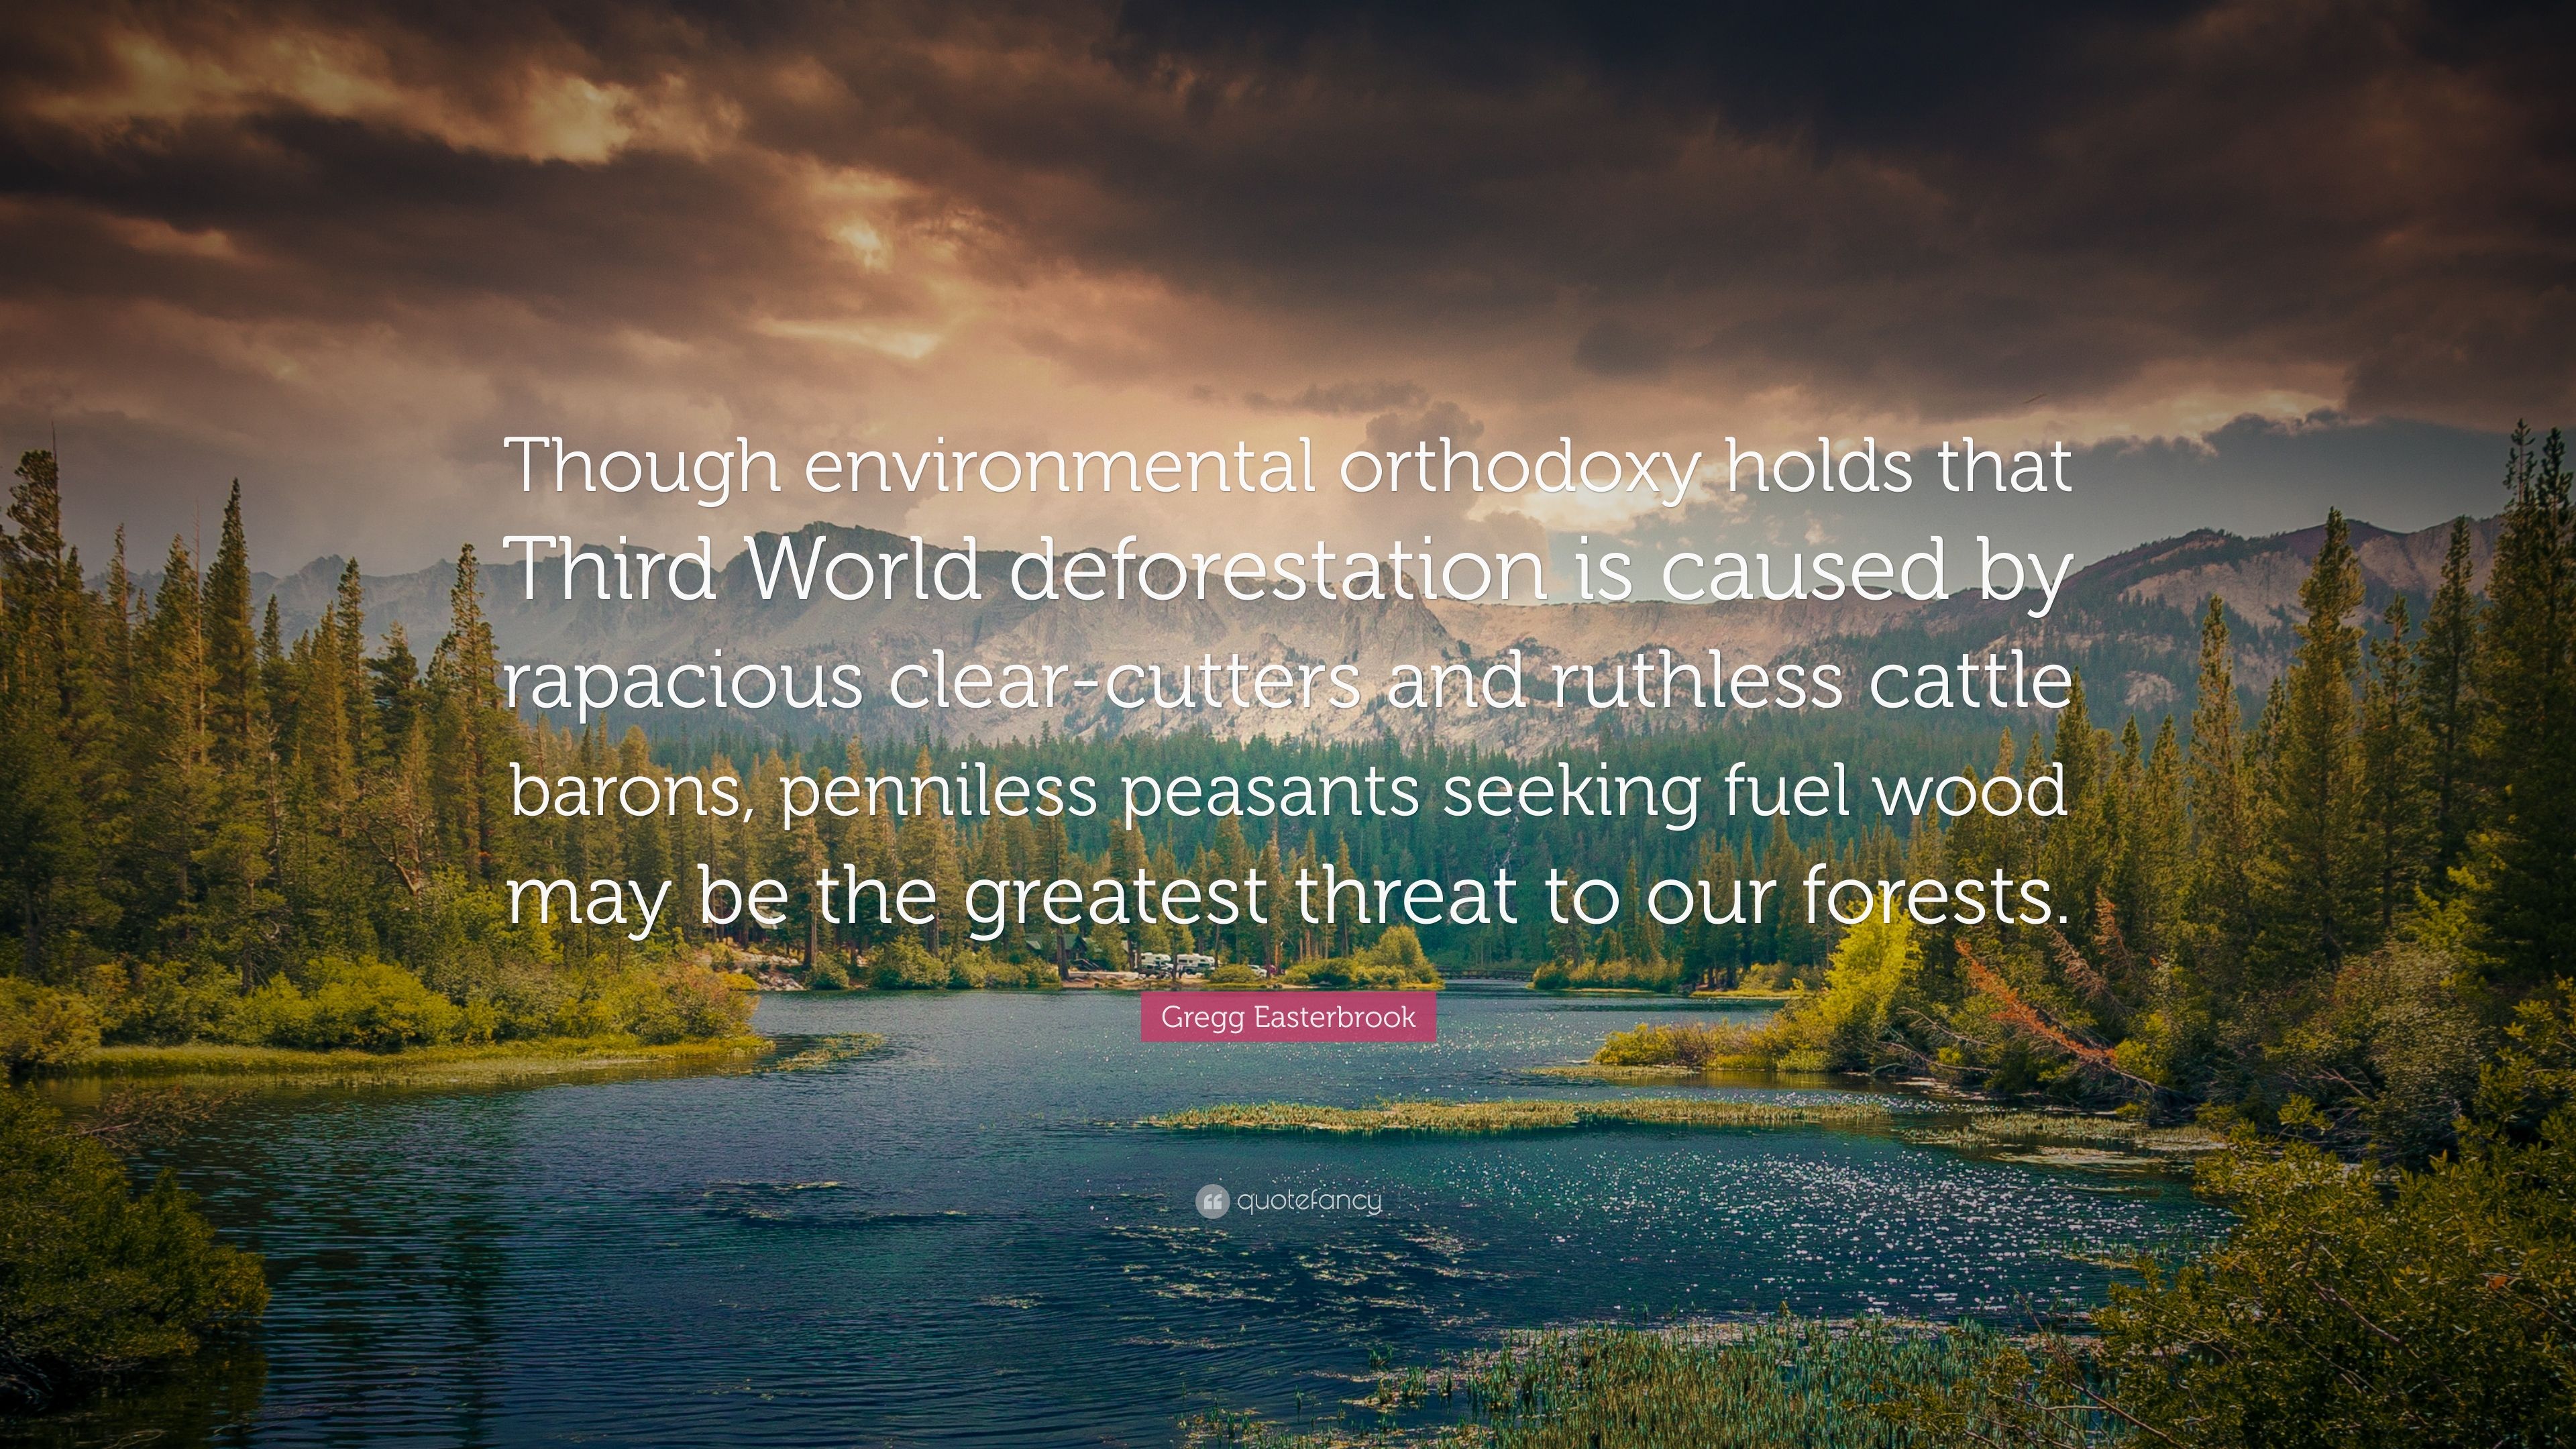 Gregg Easterbrook Quote: “Though environmental orthodoxy holds